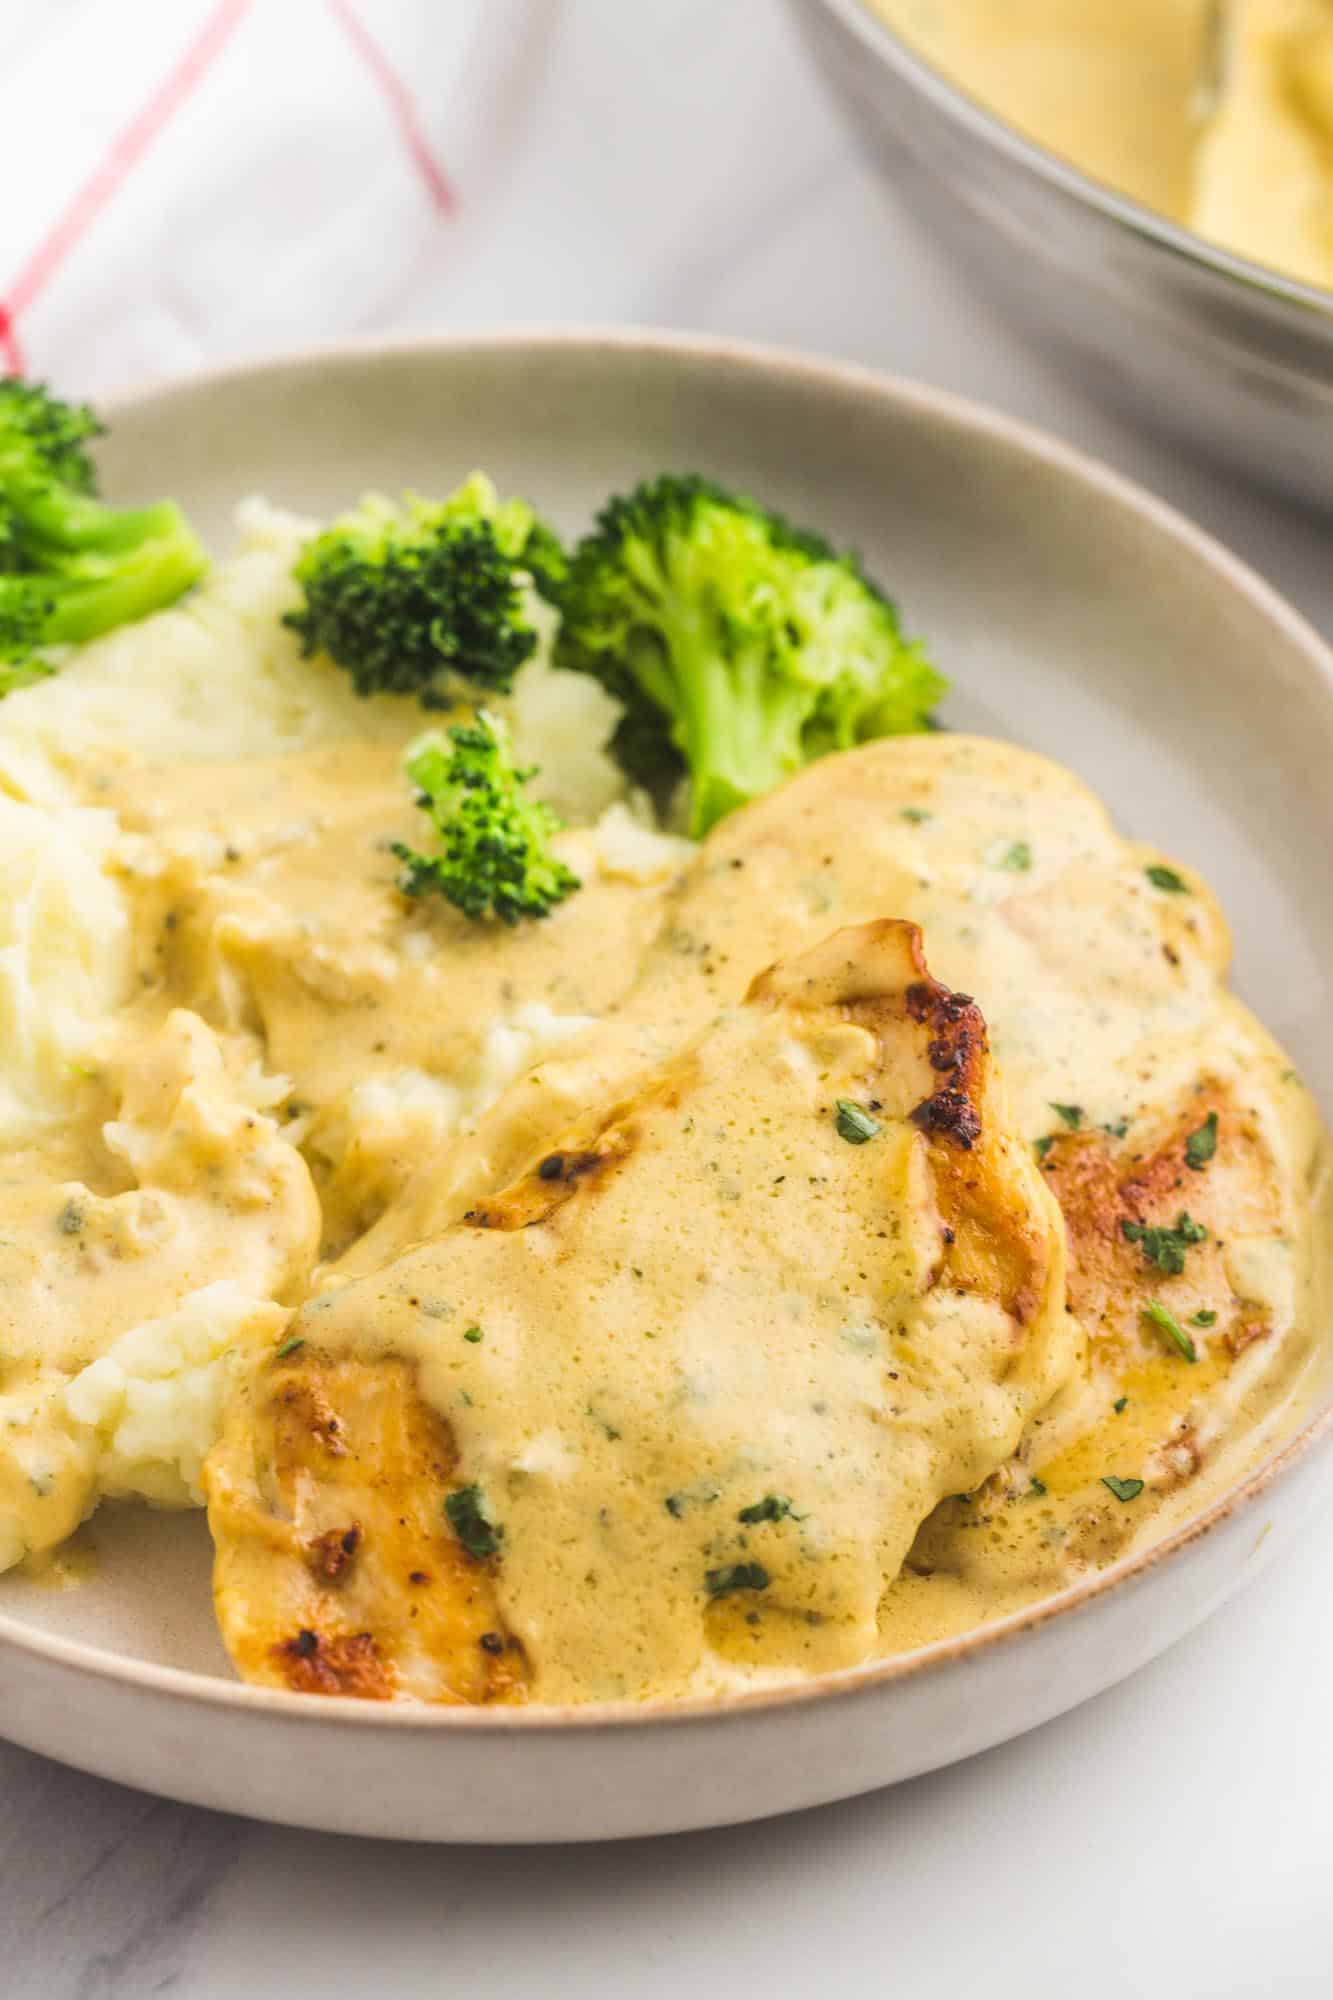 Chicken cutlets with creamy garlic sauce on a plate with mashed potatoes and broccoli